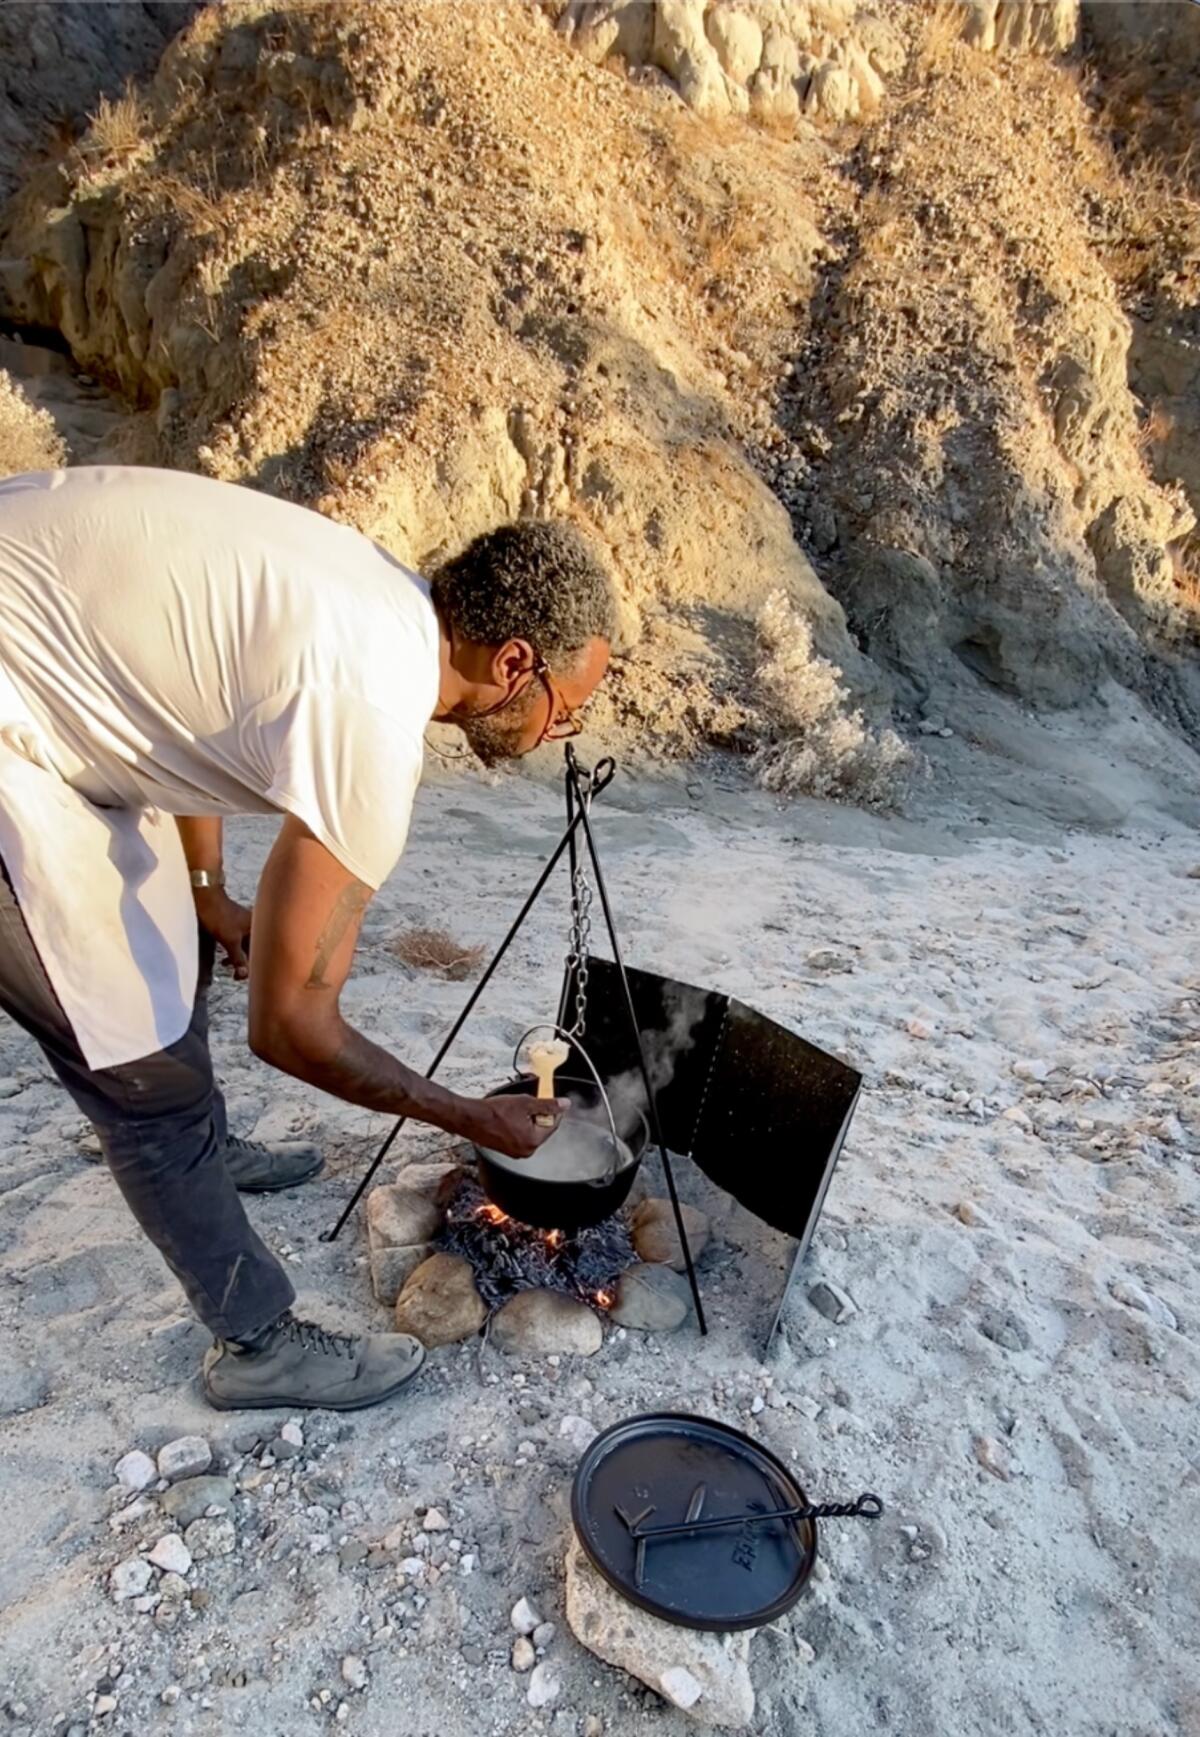 Barrett cooking rice in the canyons south of Joshua Tree.